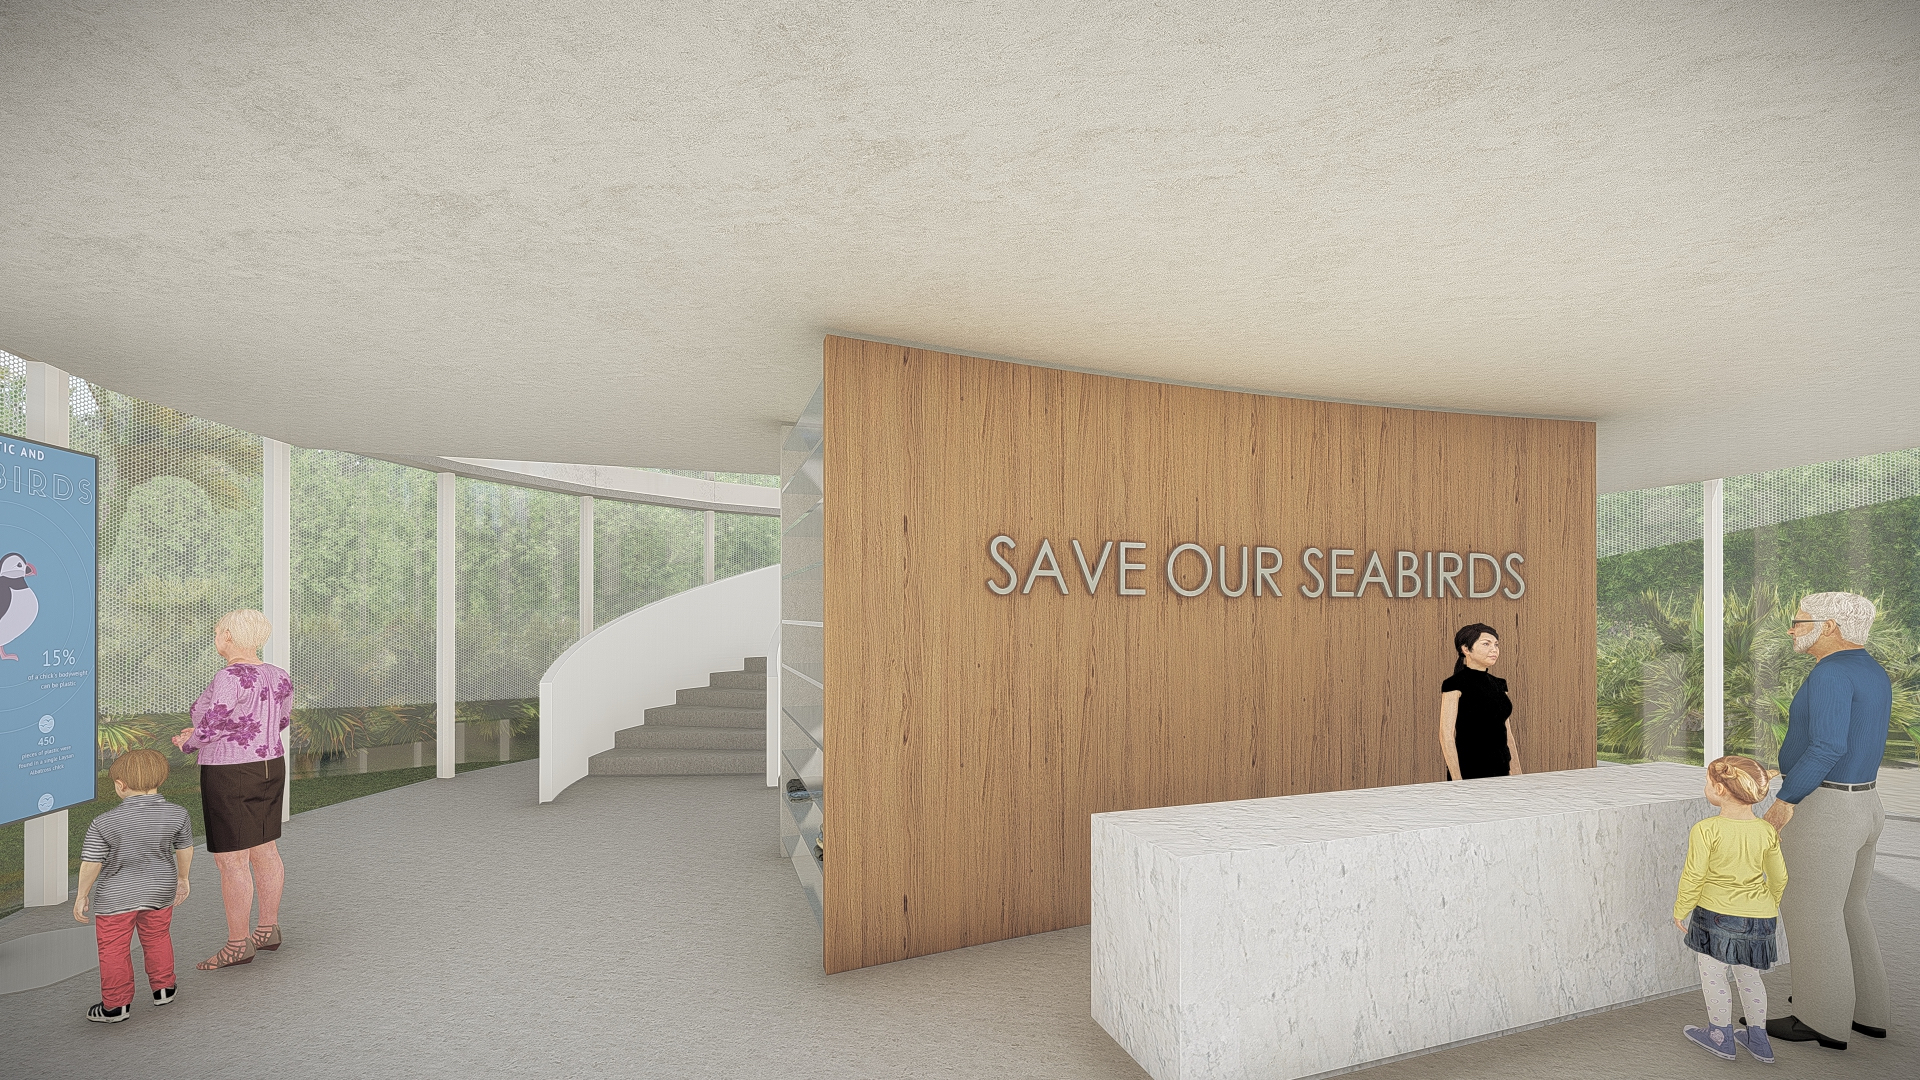 Artist rendering of the lobby space. Photo courtesy of Save Our Seabirds.